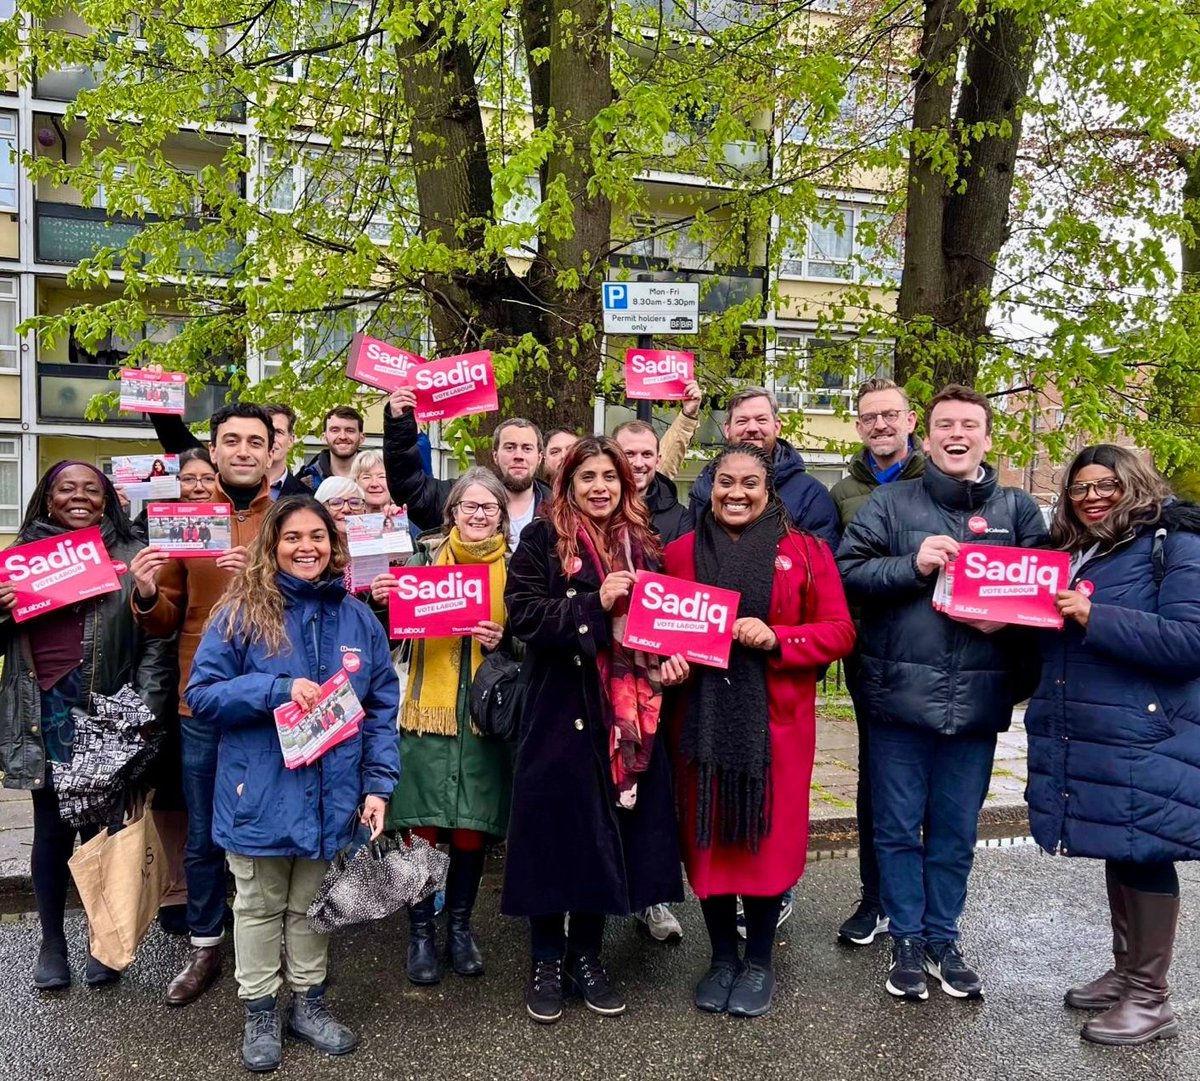 Strong support in Brixton tonight for @LabourMarina and @SadiqKhan and great to be with fellow List candidates @Devina4Labour and @jhowarduk! This election is truly a two-horse race and the choice on May 2nd couldn't be starker. #VoteLabour